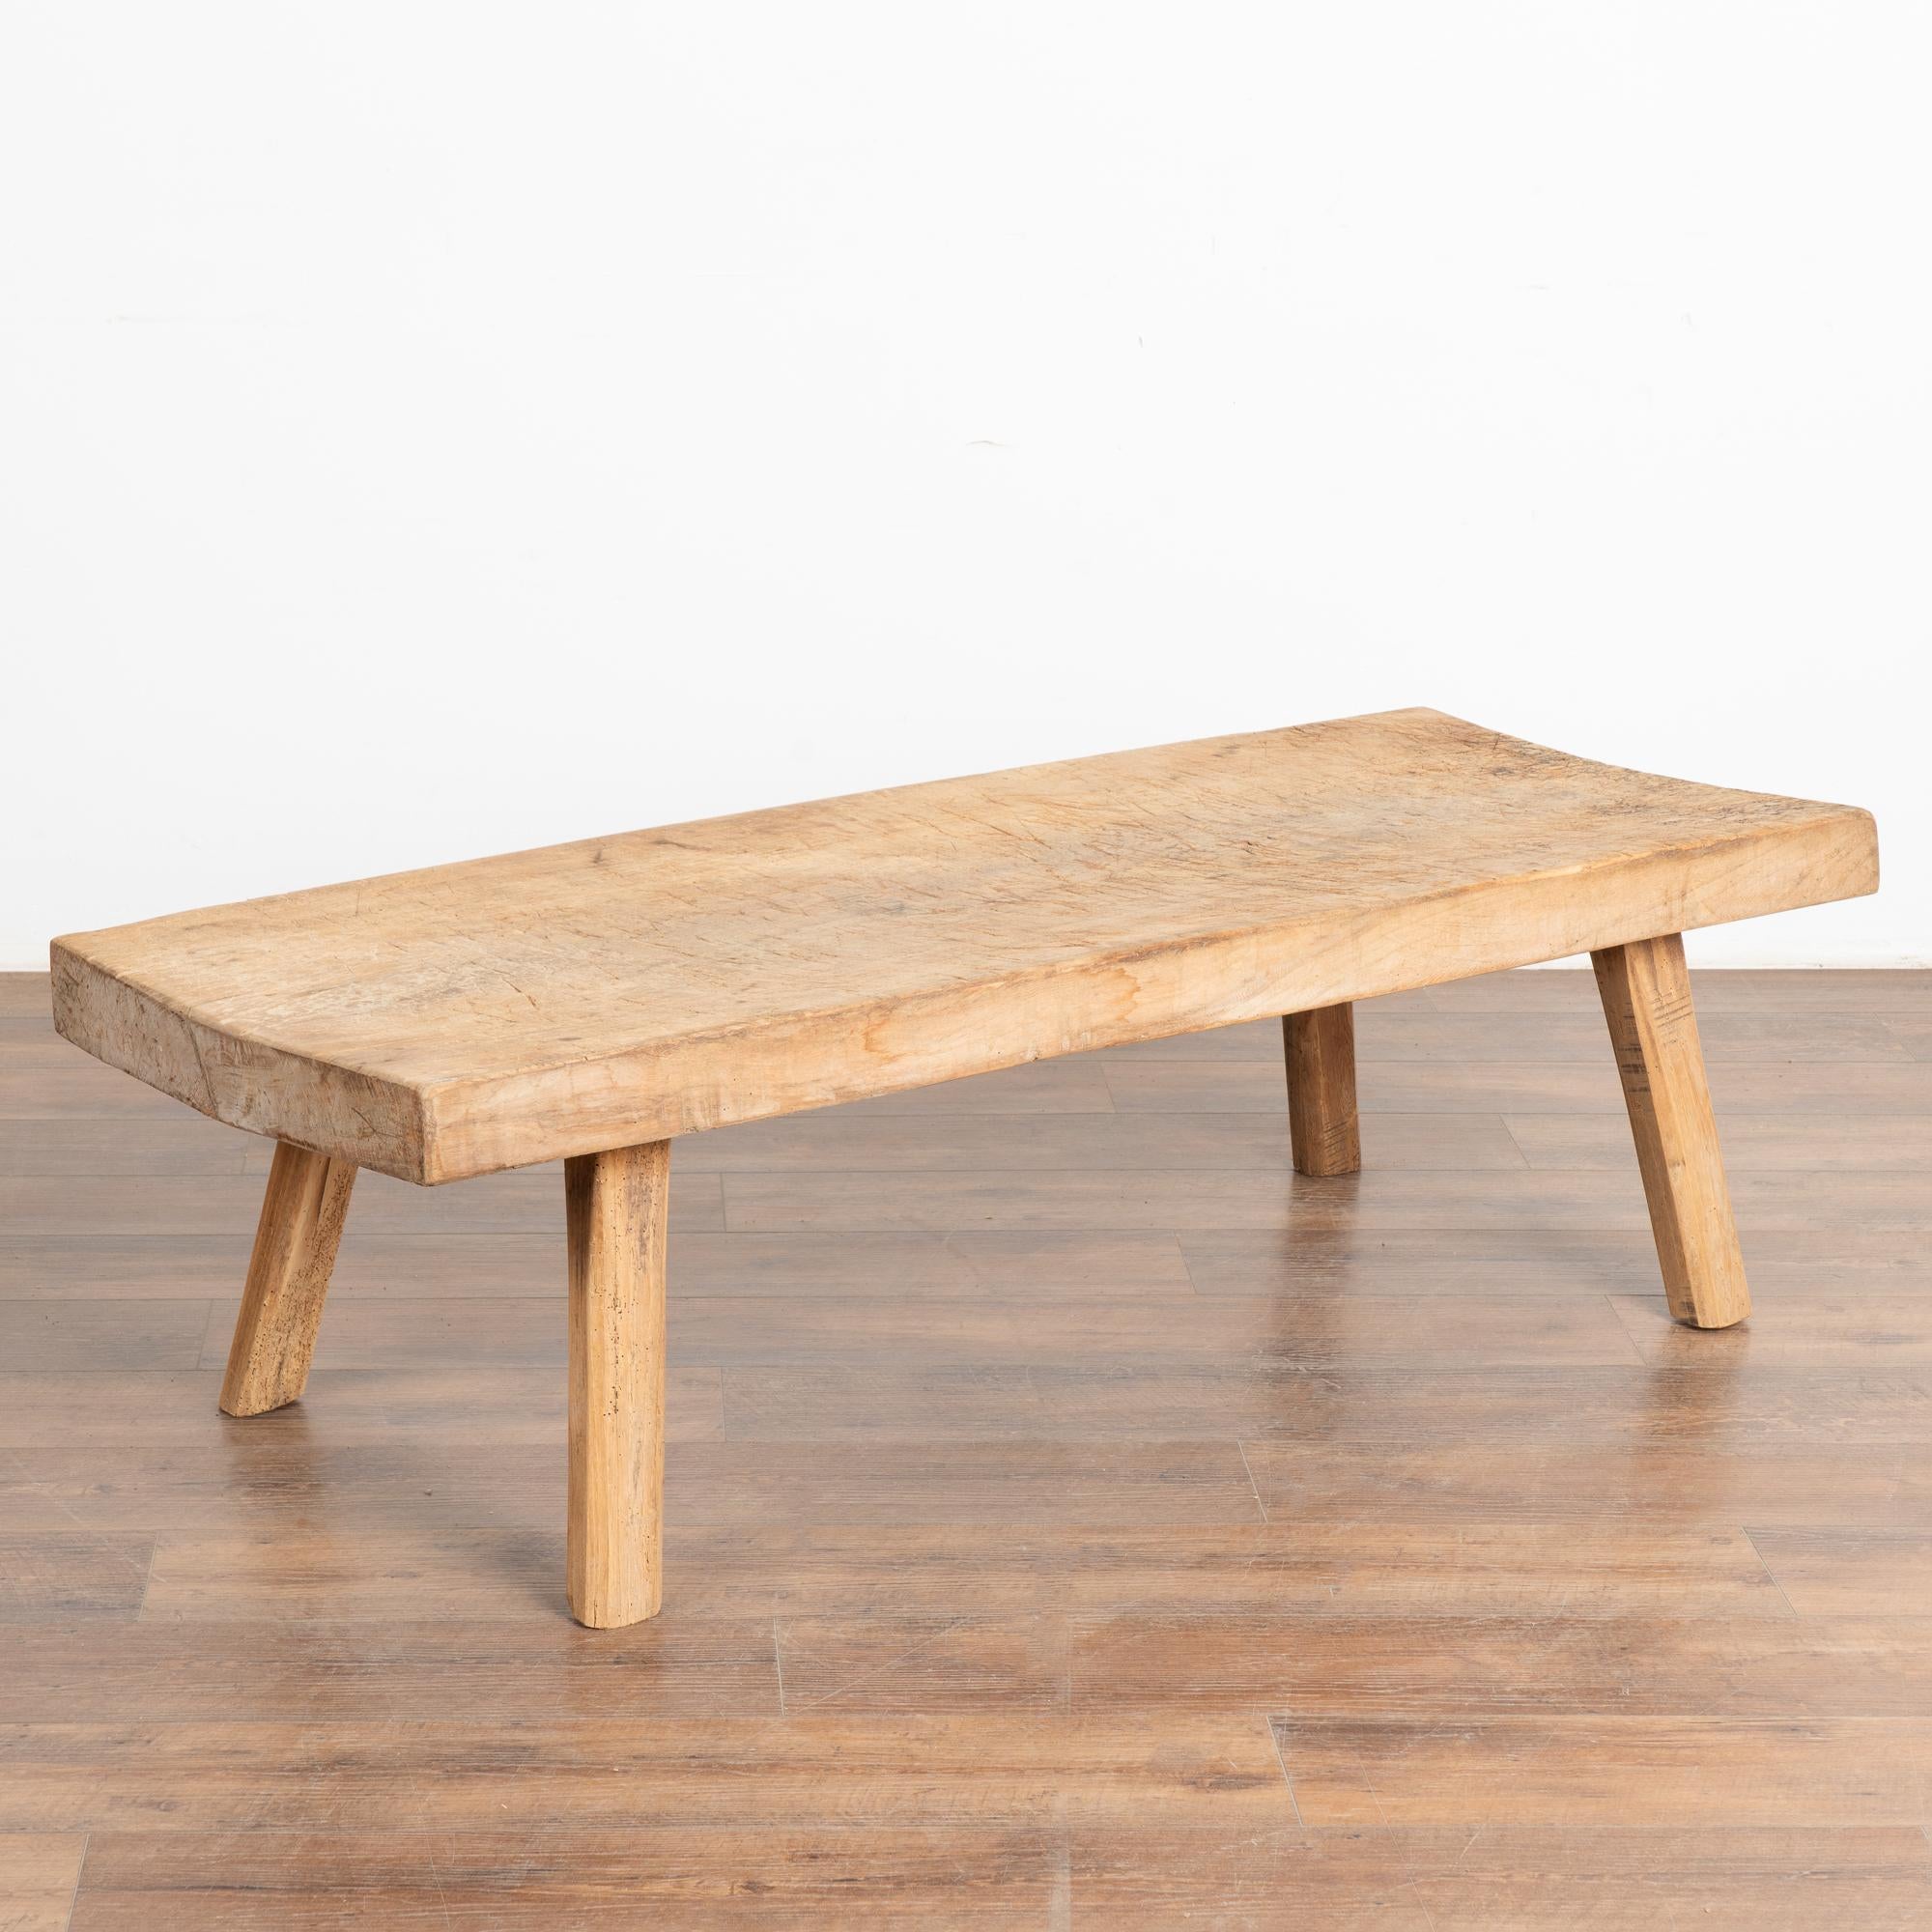 The appeal of this rustic coffee table comes from the thick wood of the top that originally served as a work table. 
Note the gouges, nicks, old cracks and stains that all combine to build the vintage character of this coffee table. 
This table has